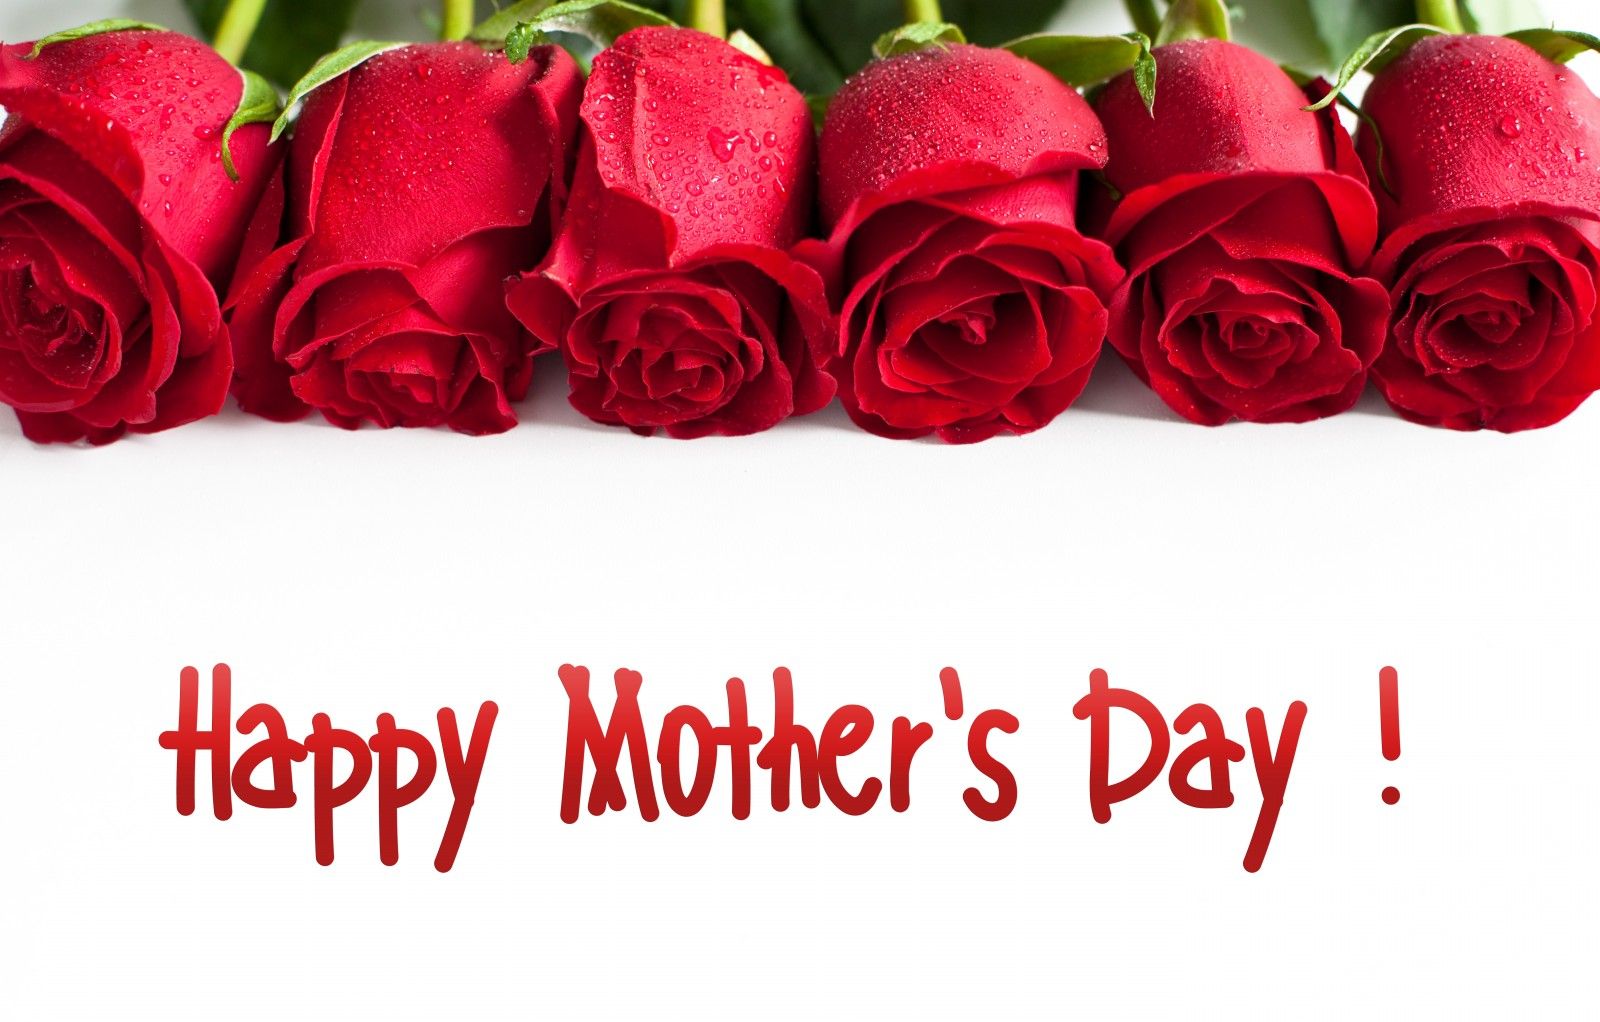 Mother's Day wallpaper, Holiday, HQ Mother's Day pictureK